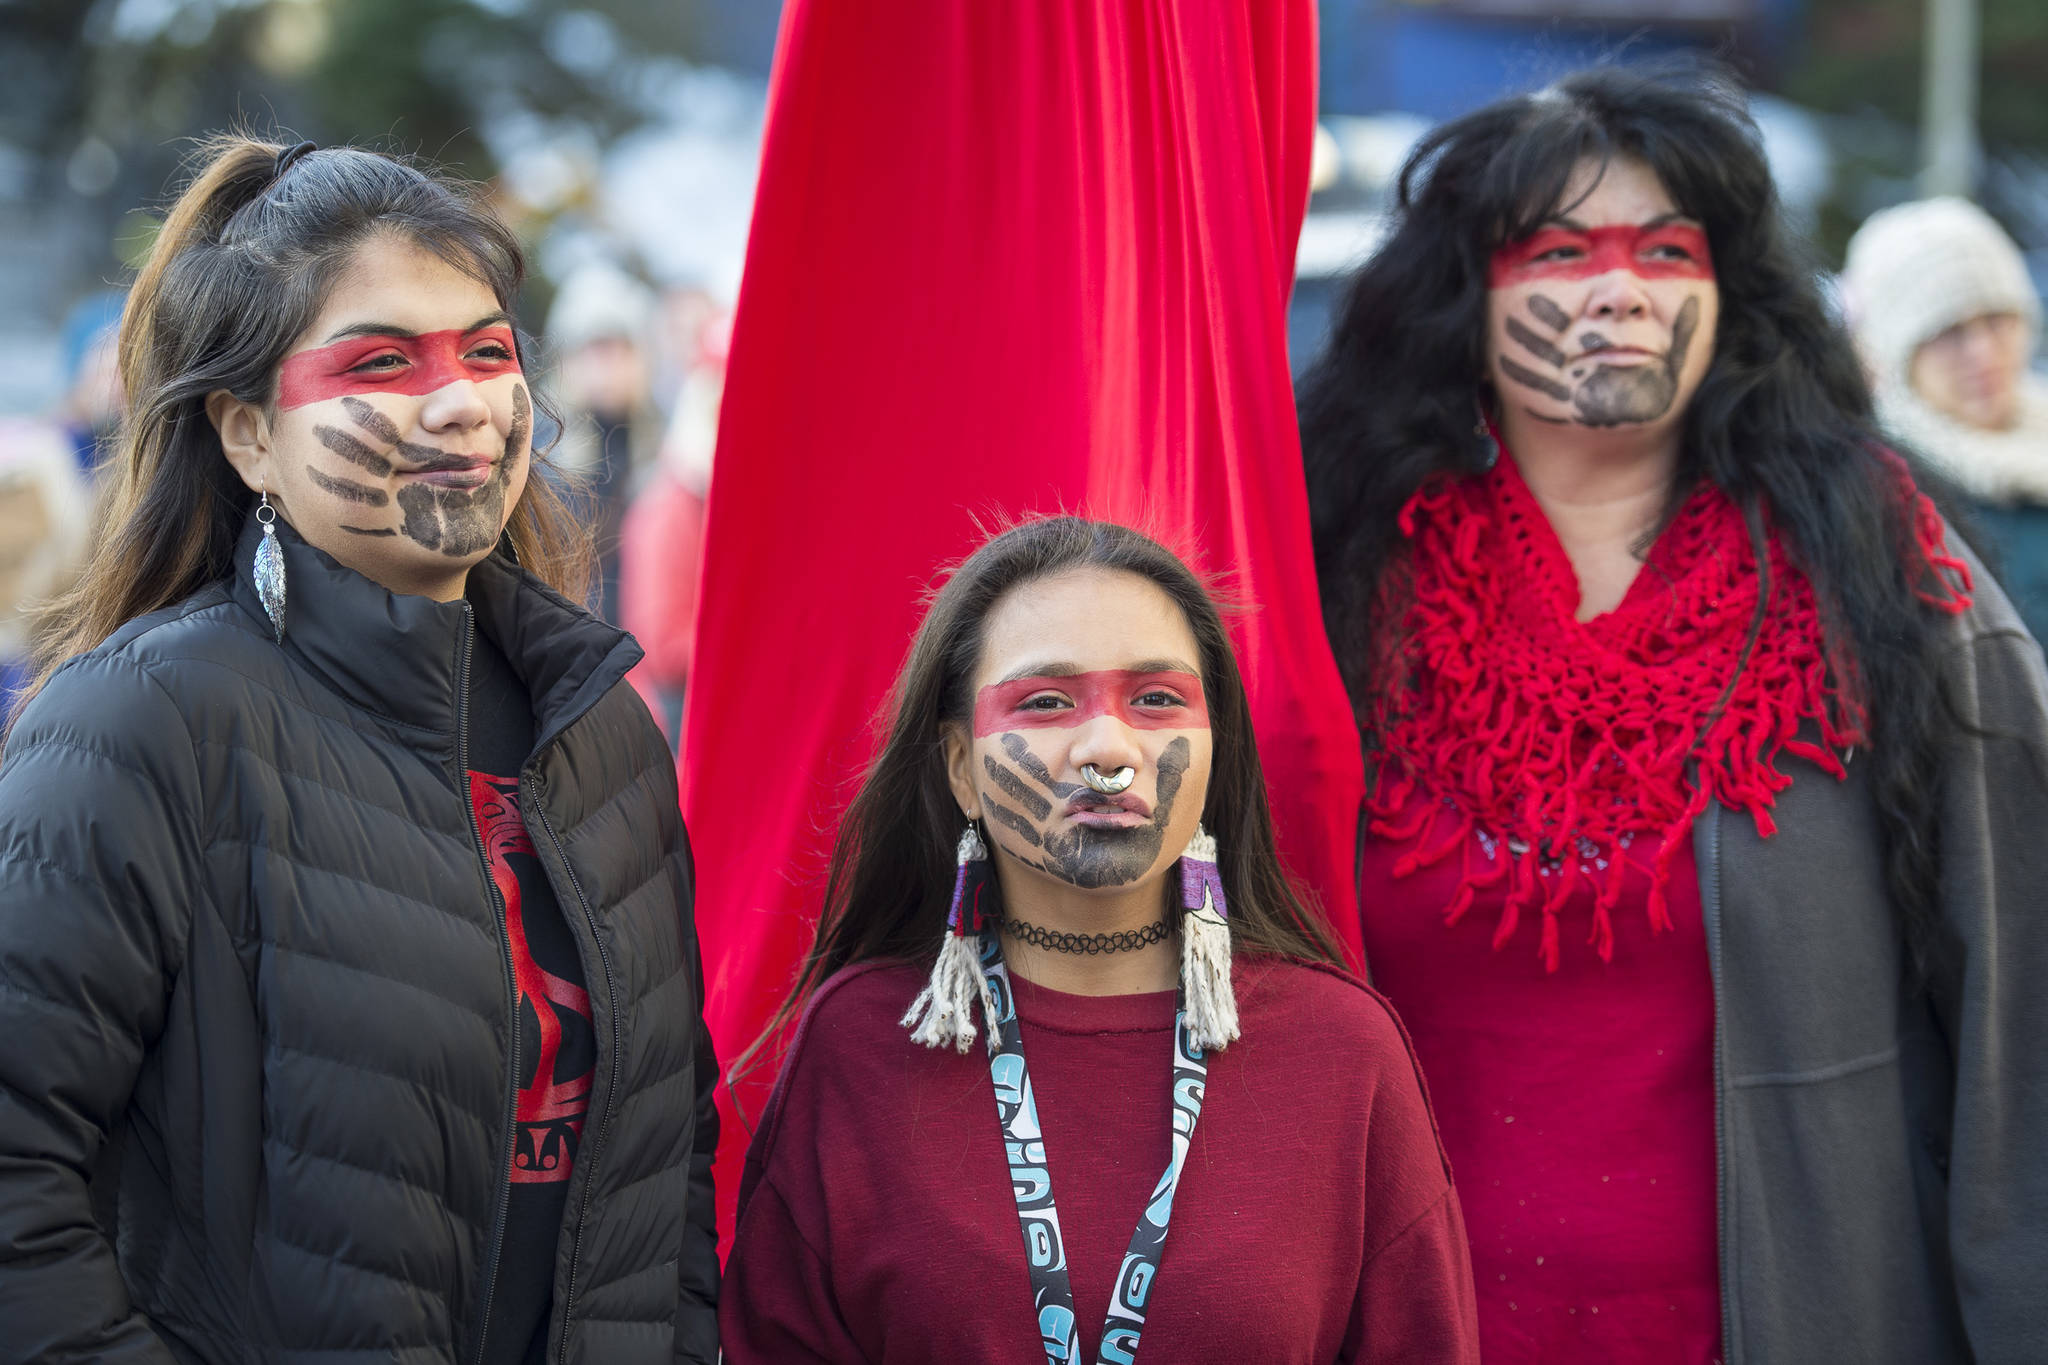 Susan Brouillette, right, with her daughters, Sierra, center, and Kendra, attend the Women’s March on Juneau in front of the Alaska State Capitol on Saturday, Jan. 19, 2019. (Michael Penn | Juneau Empire)